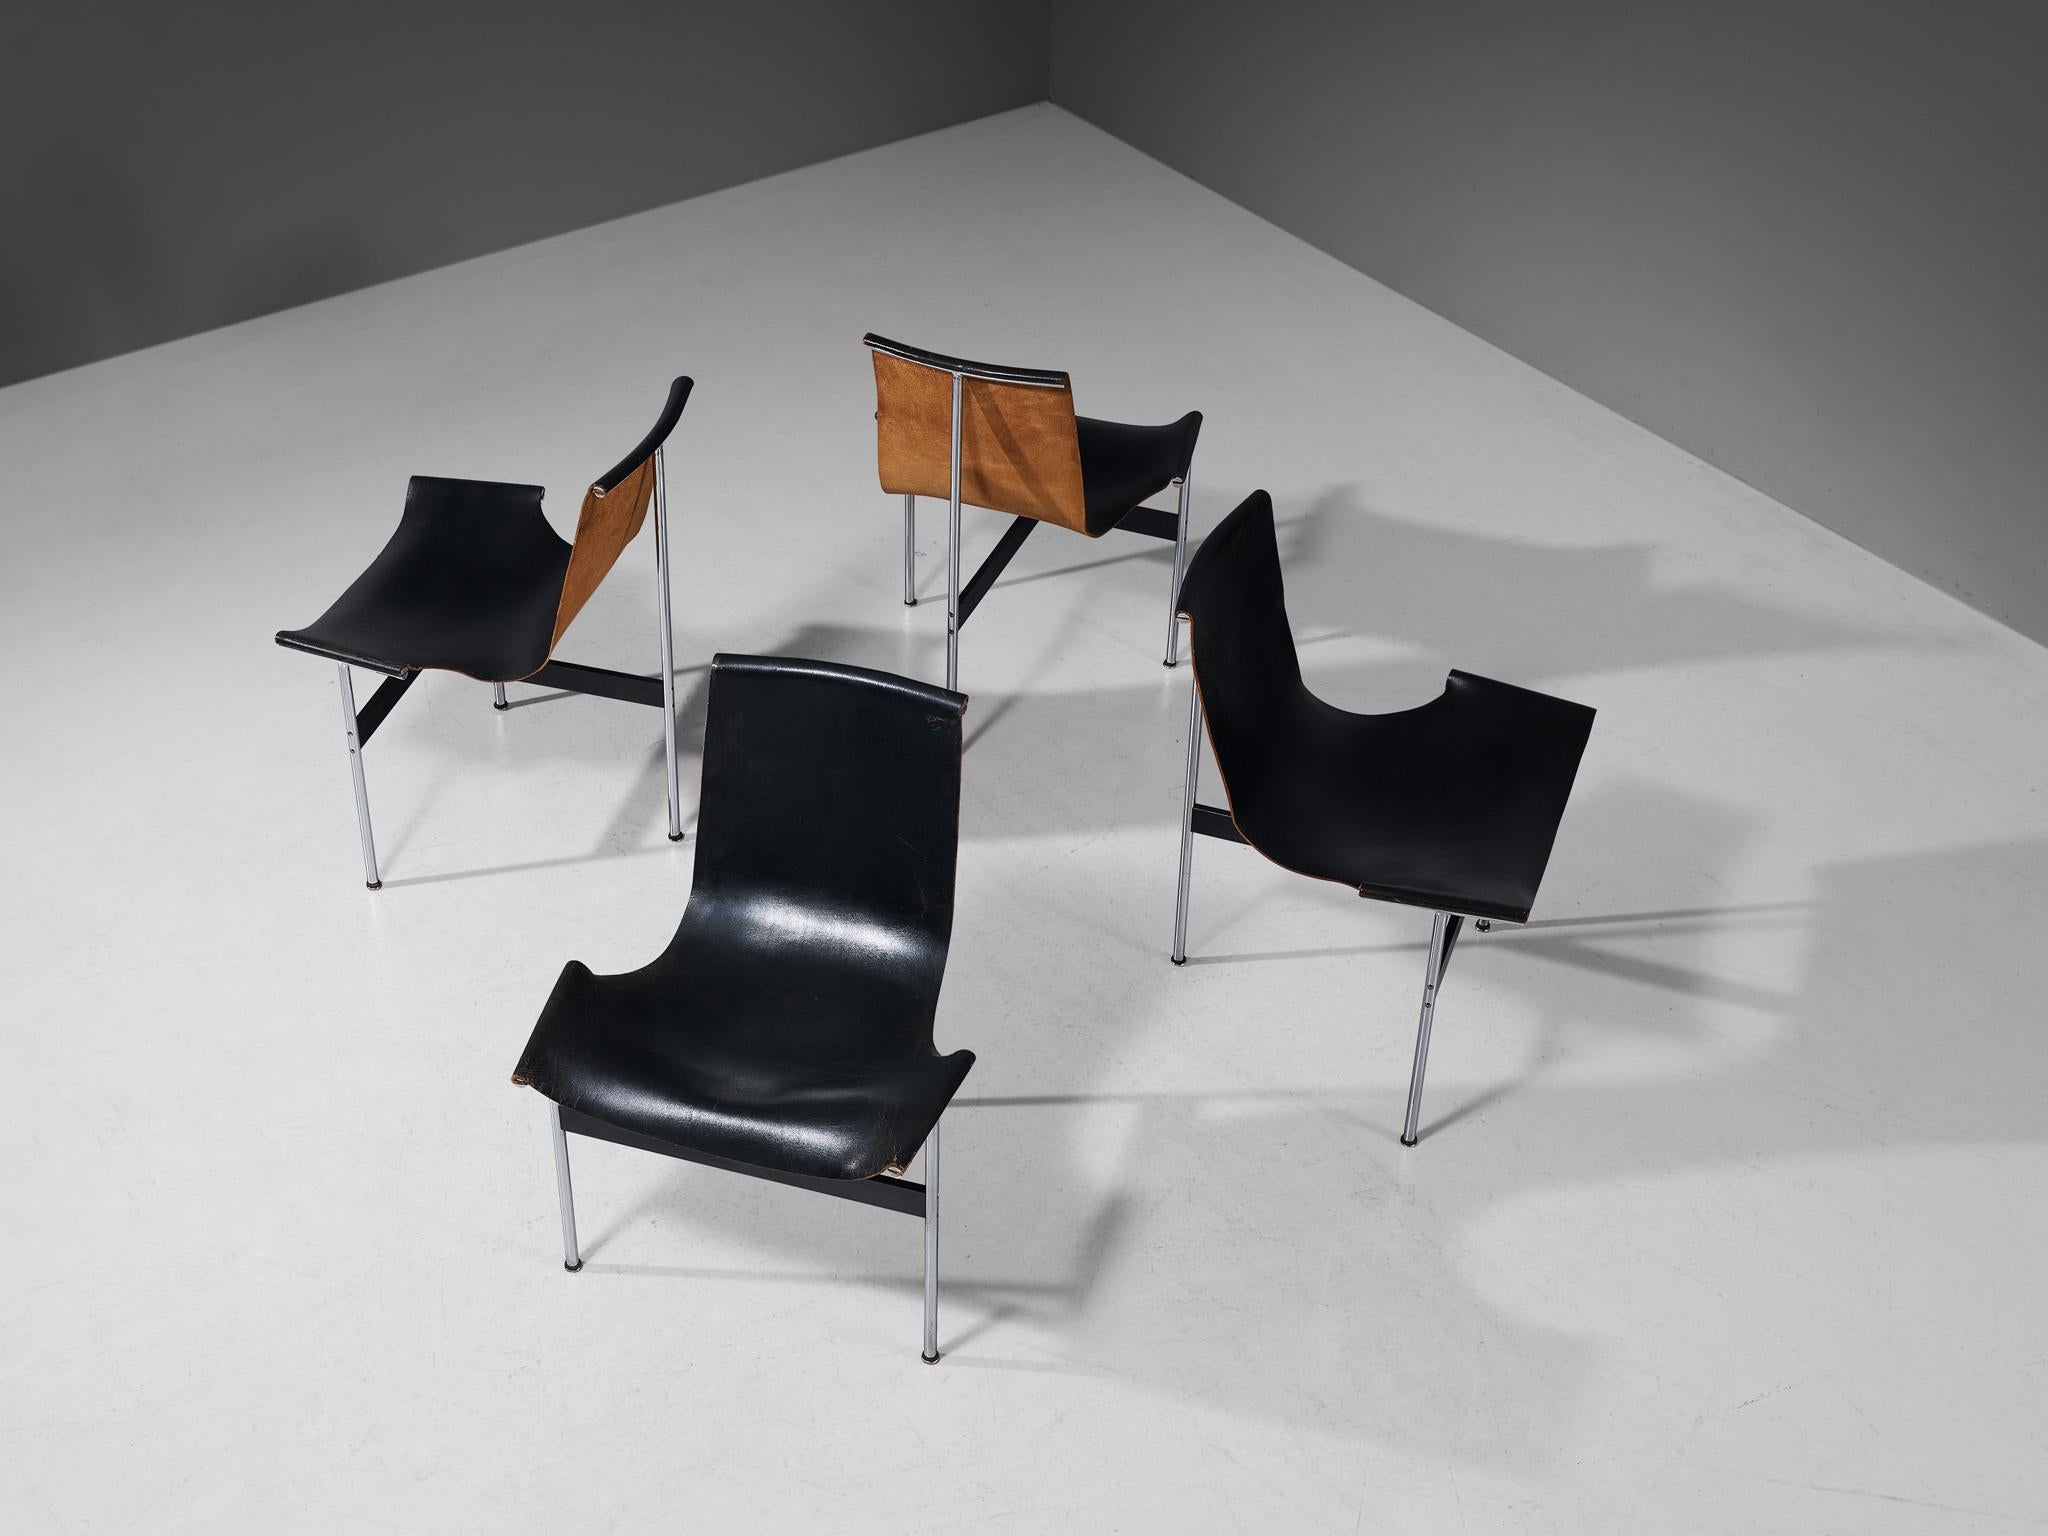 Katavolos, Kelley and Littell, set of four T-chairs, chrome-plated steel, enameled steel and black leather, United States, 1952.

This set of elegant and playful three-legged chairs has a very delicate look. The chairs are curvaceous and